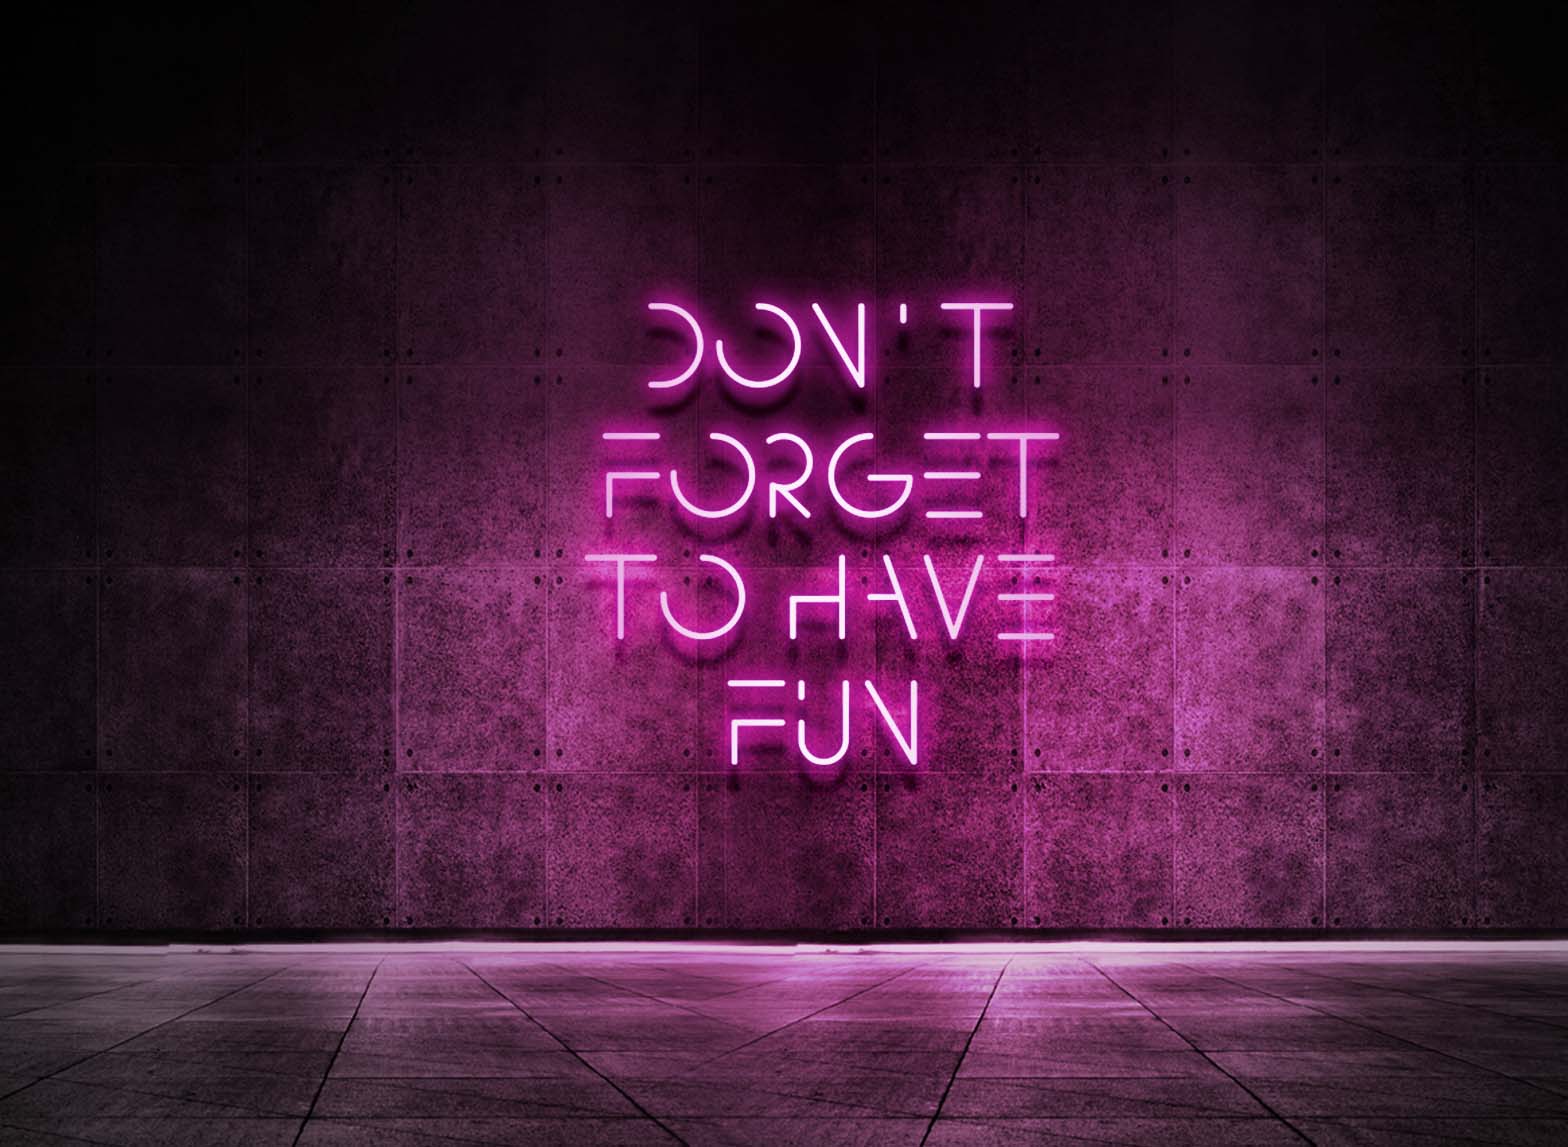 DON'T FORGET TO HAVE FUN